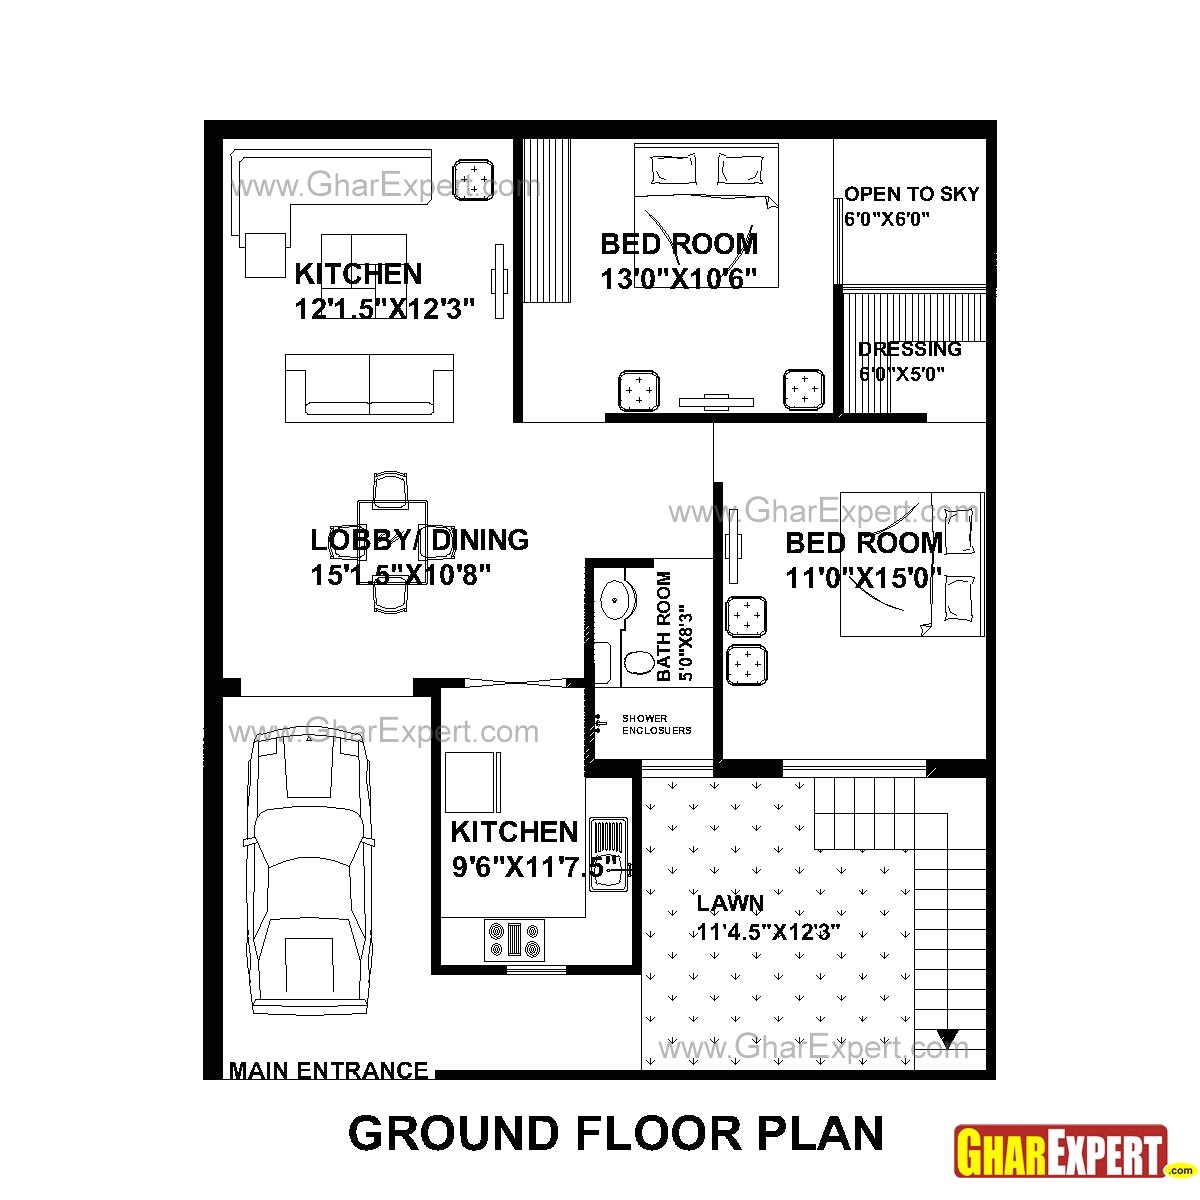 home map design free layout plan in india new house map design simple home ideas inspirations plan gallery india